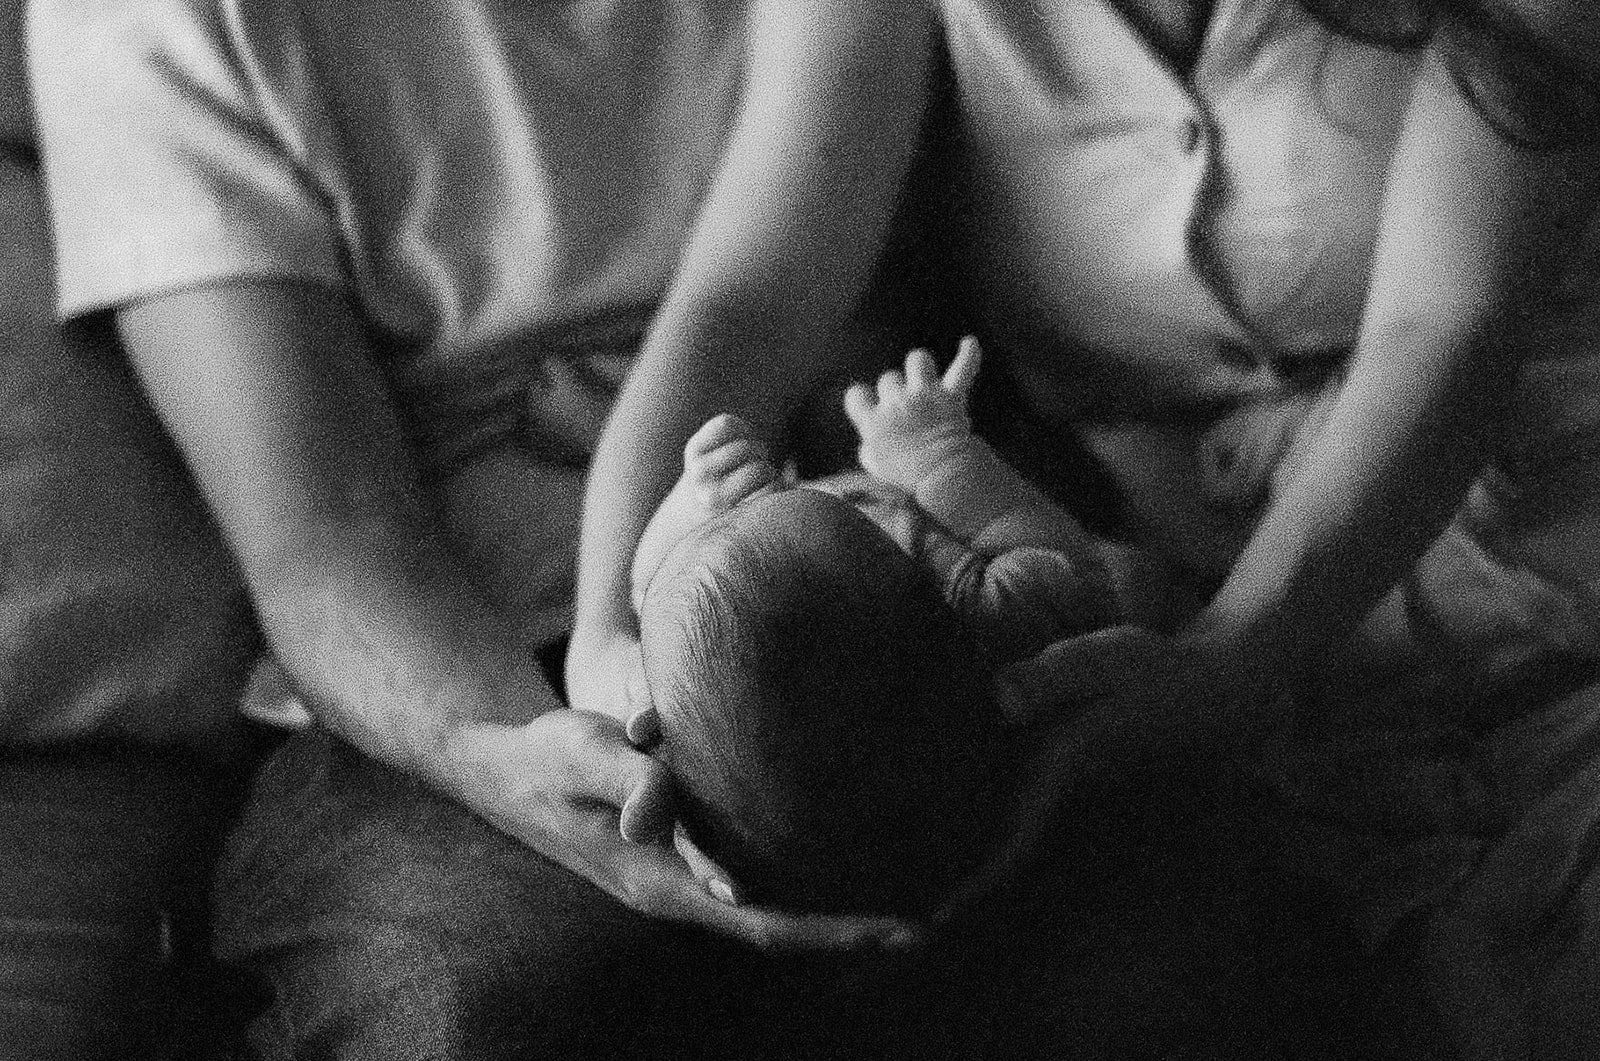 At home newborn photography session in the East Bay on 35mm